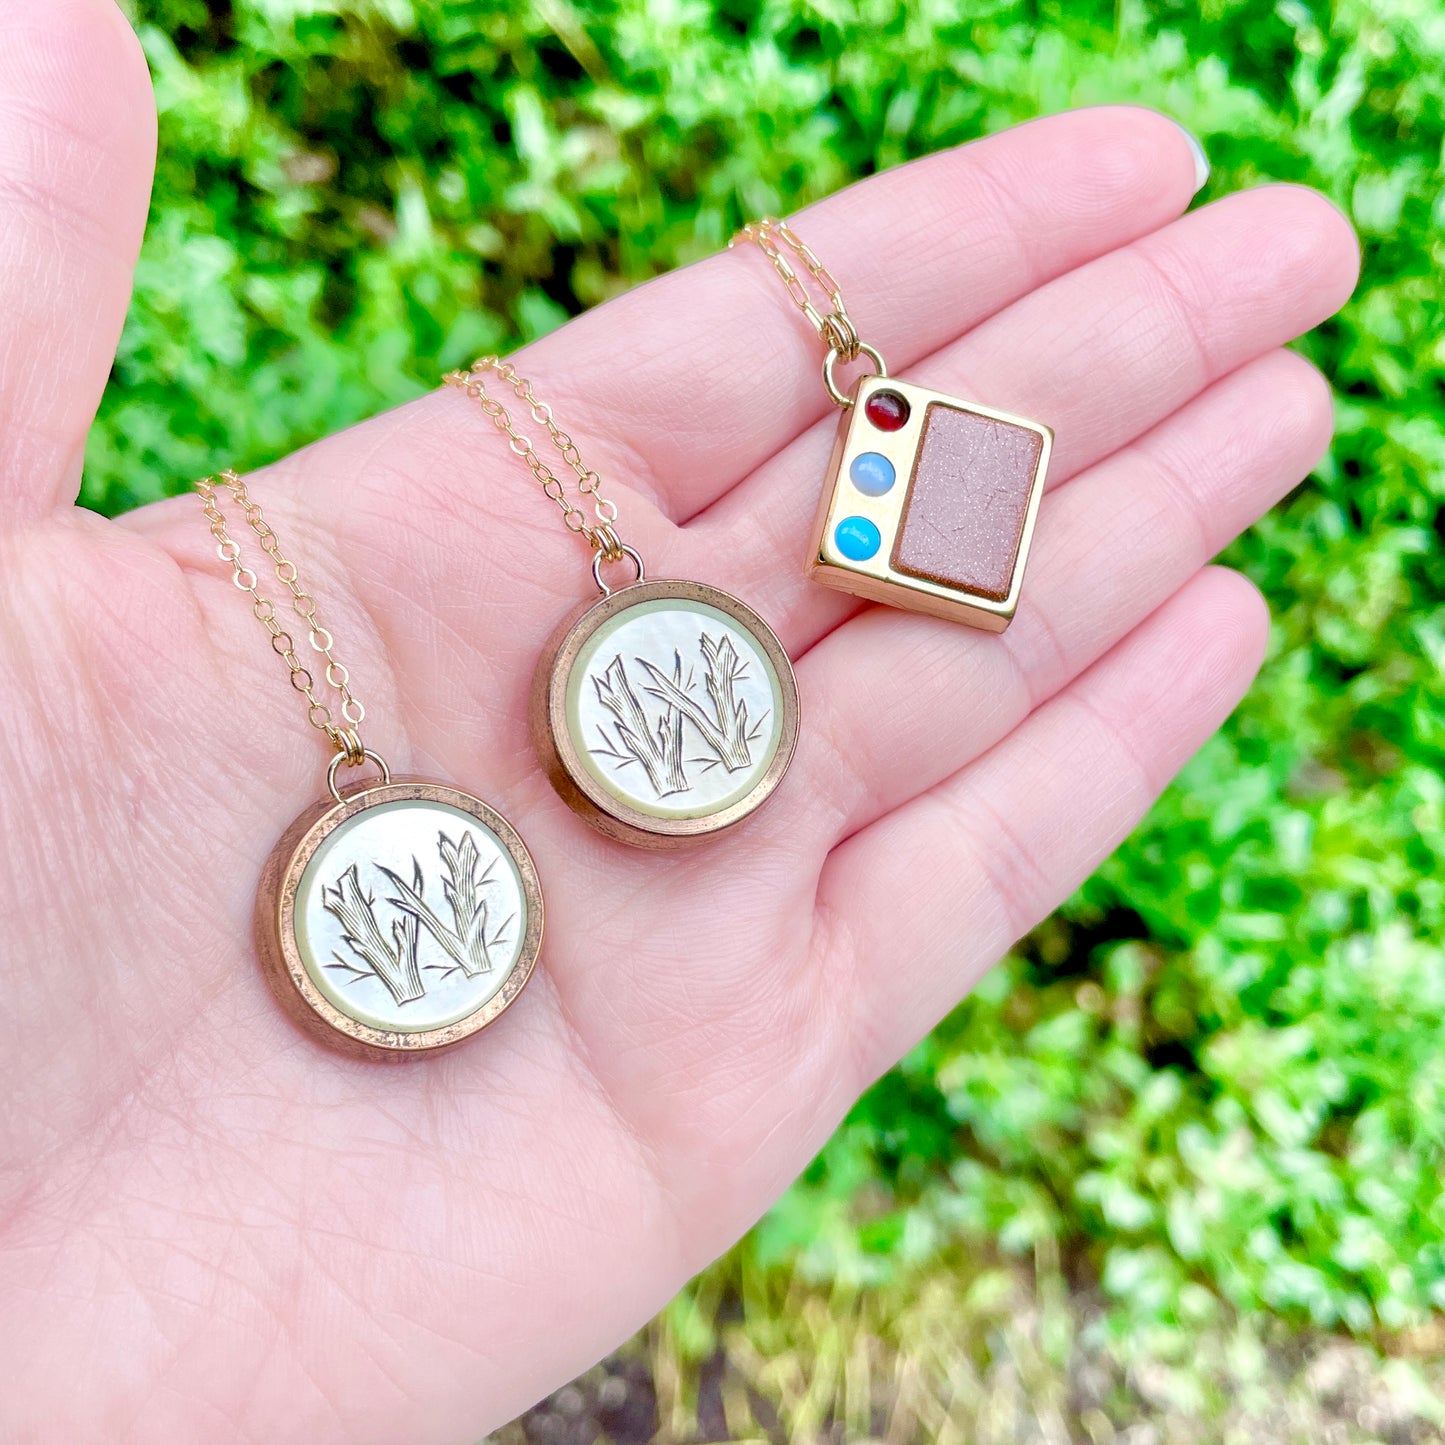 Three antique cufflink conversion pendant necklaces laying on the pal side of a left hand with green foliage in the background.